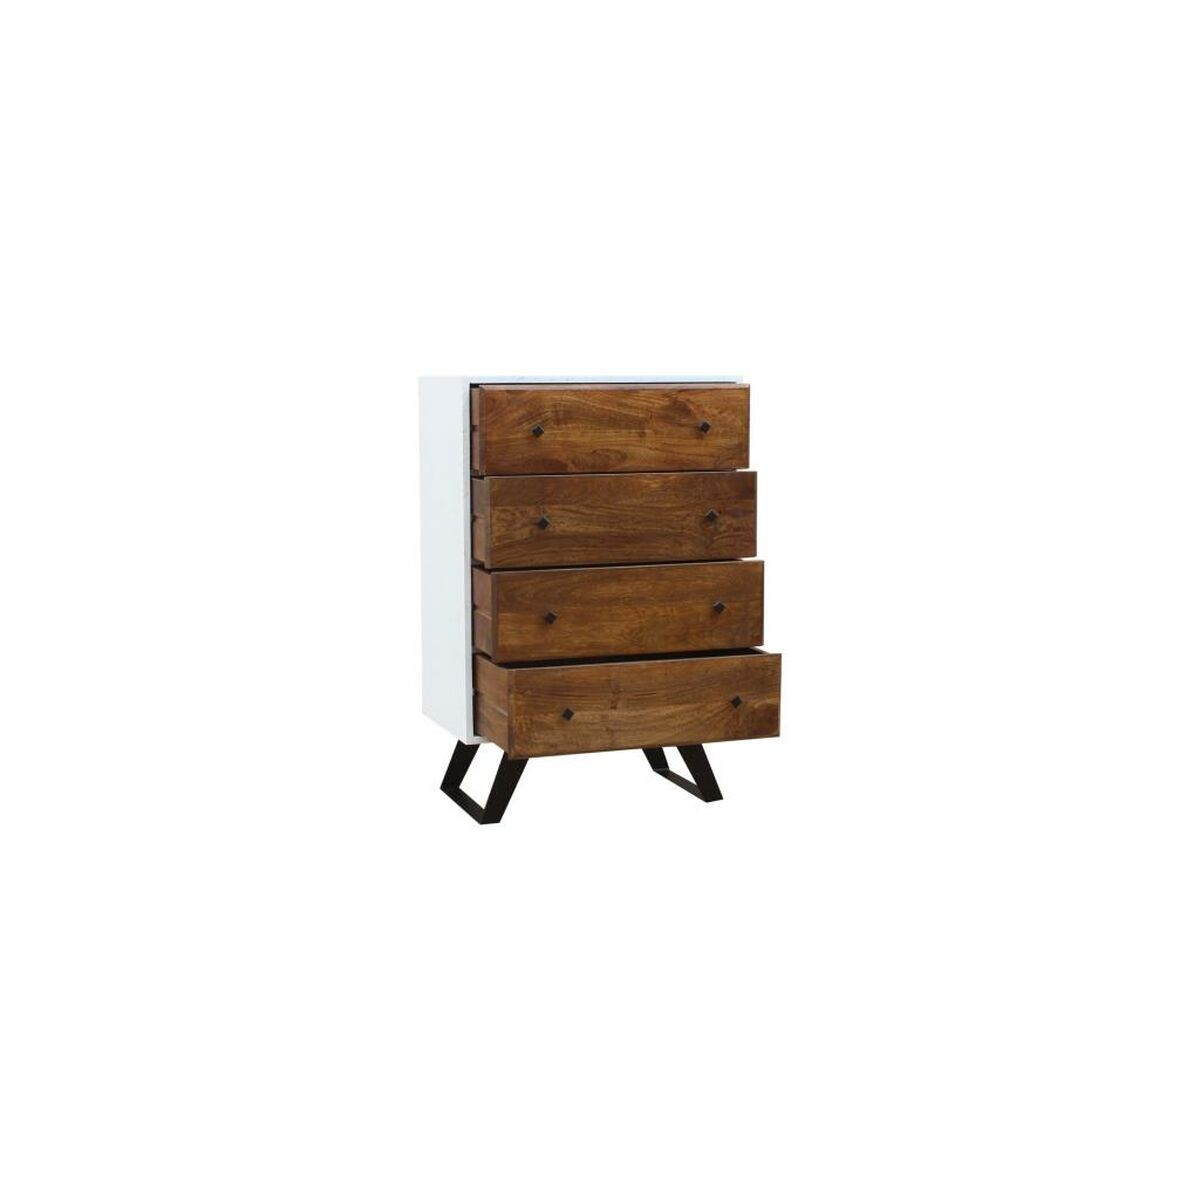 White Chest of drawers in Mango Wood with Black Metal Legs (70 x 40 x 105 cm)